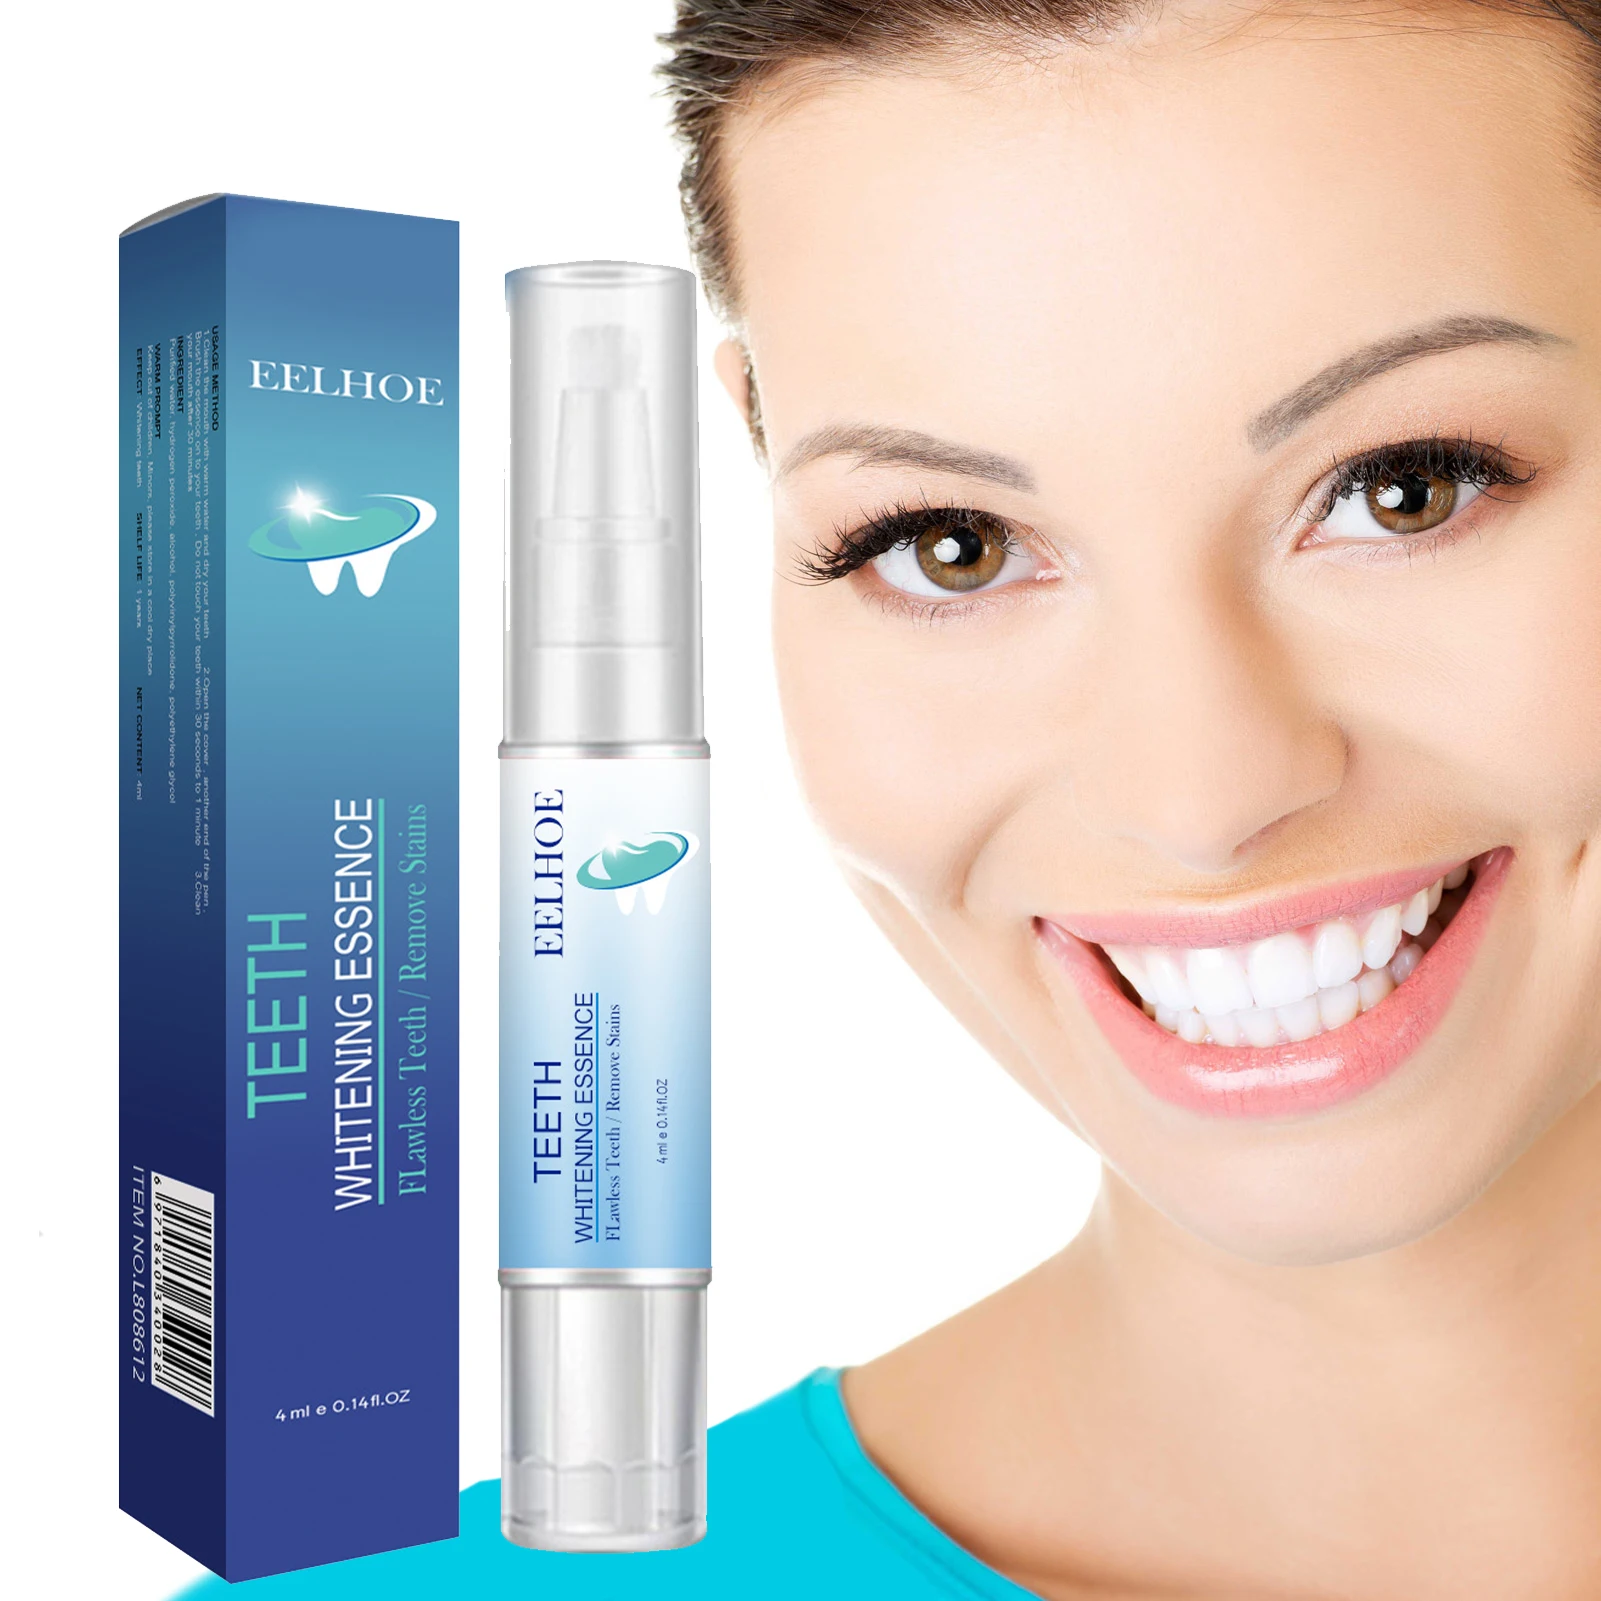 

Teeth Whitening Pen Teeth Stain Remover to Whiten Teeth Effective and Painless Whitening No Sensitivity Natural Mint Flavor